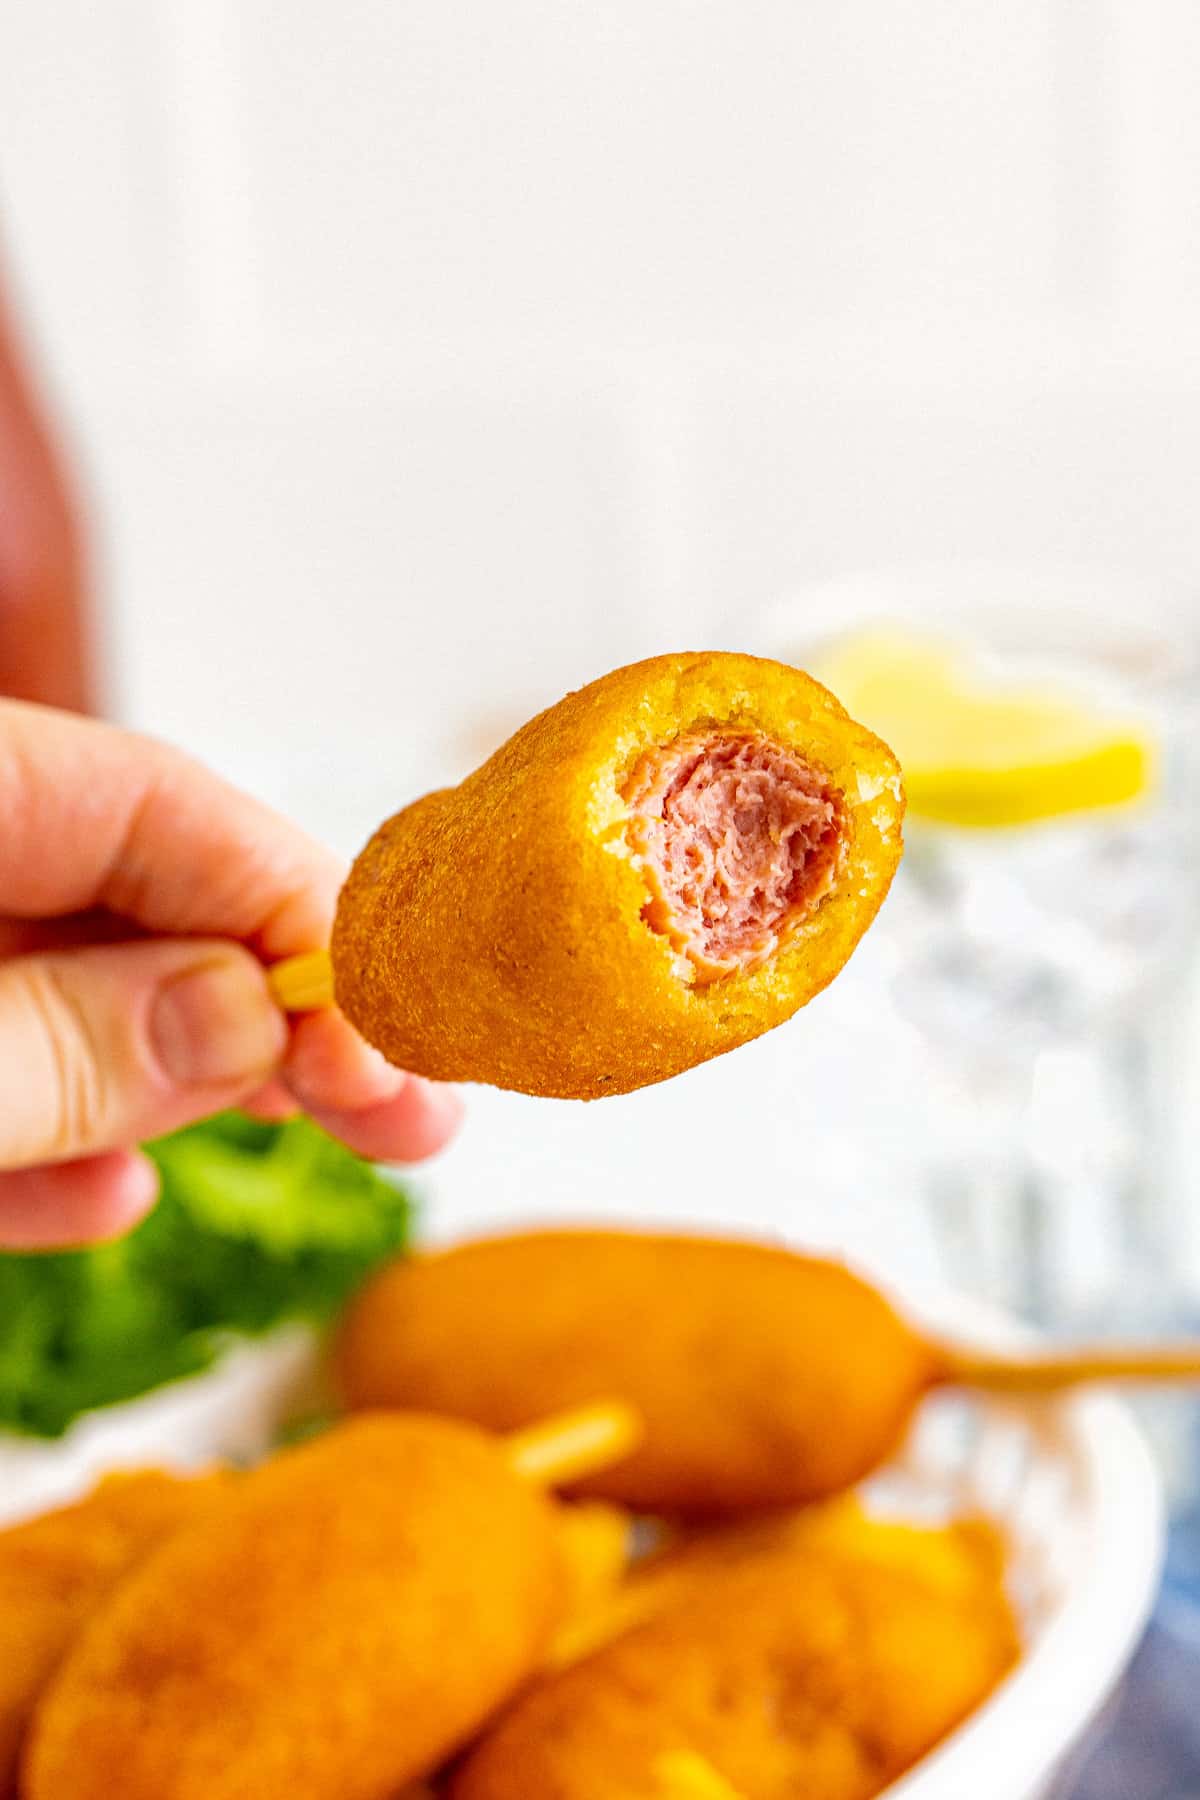 Hand holding mini corn dog with bite taken out of the top to reveal fried dough and hot dog inside.